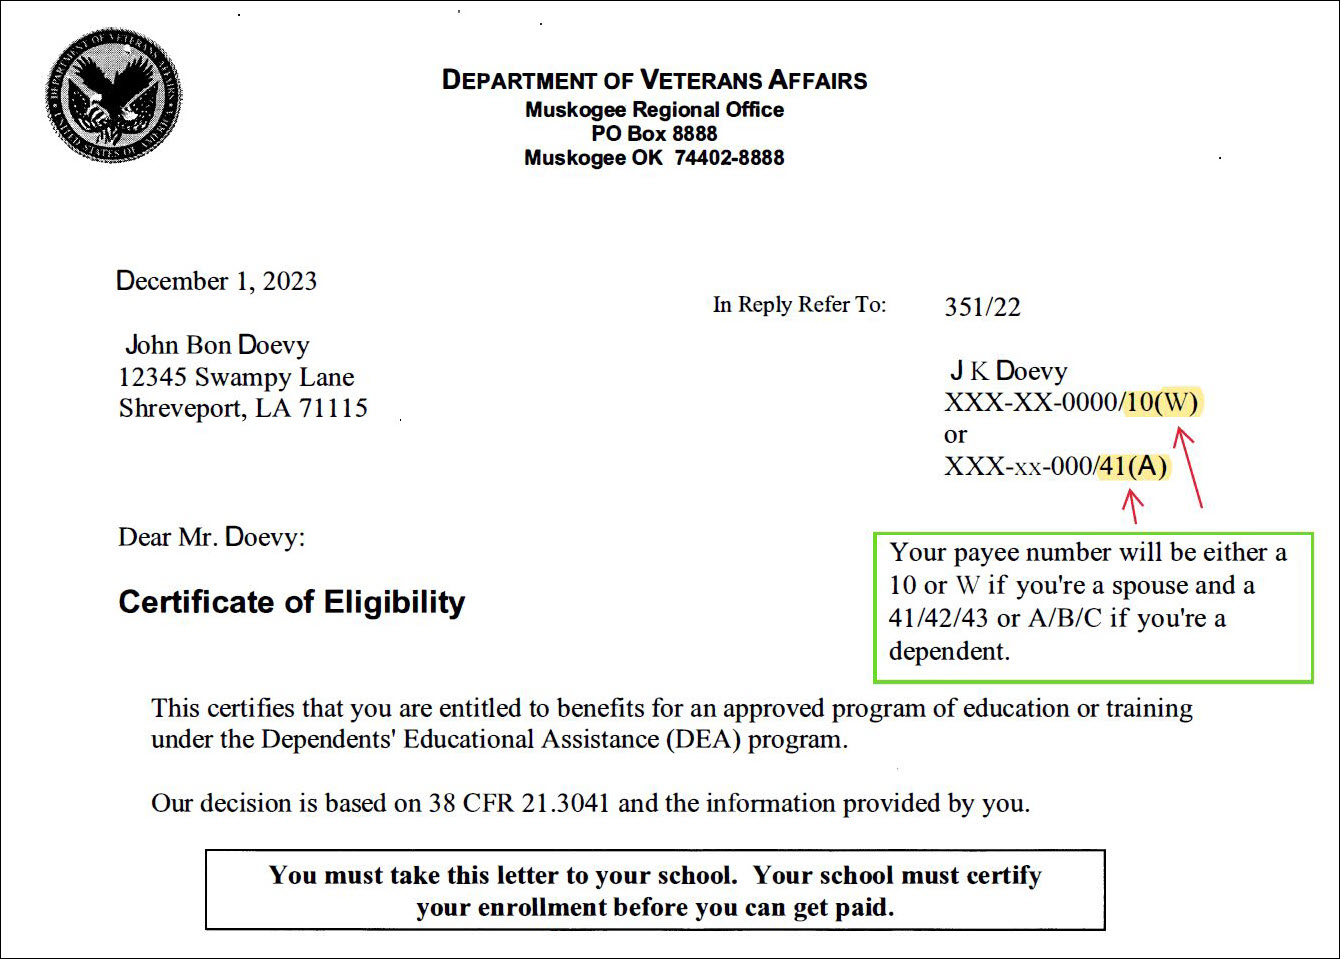 A sample image of a certificate of eligibility form that features two example payee numbers in the upper-right corner. 